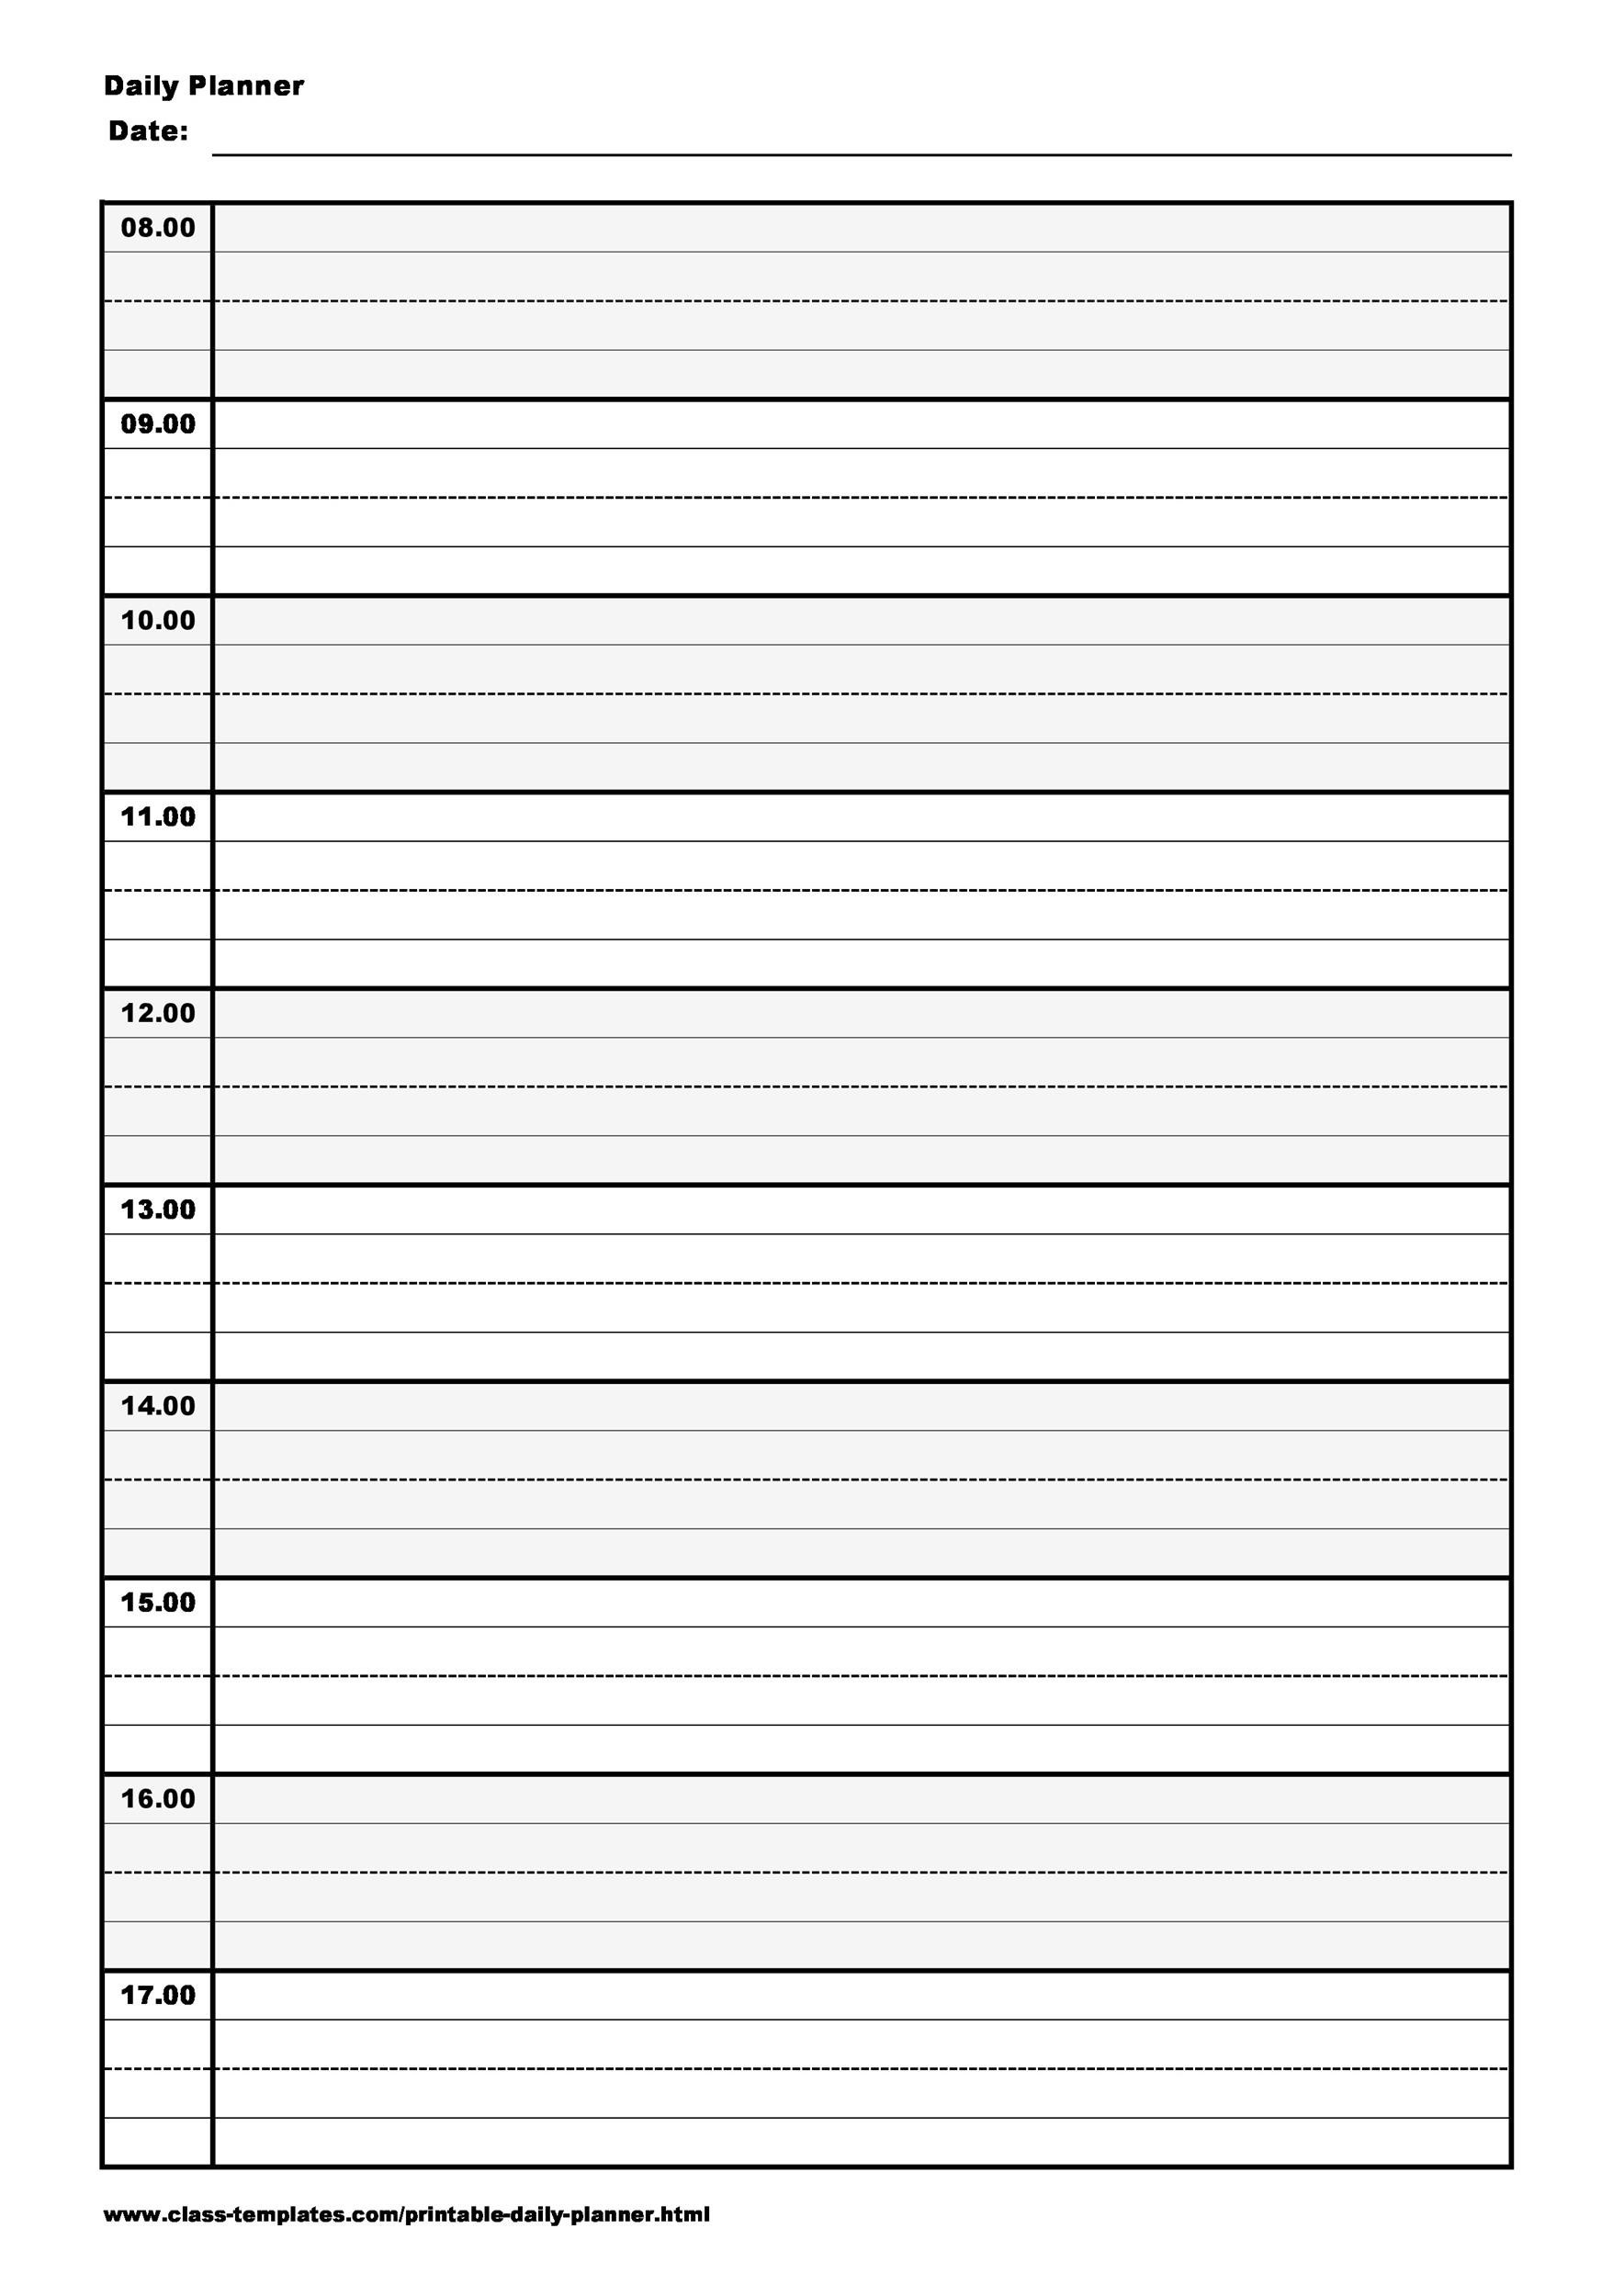 47 Printable Daily Planner Templates FREE in Word Excel PDF 